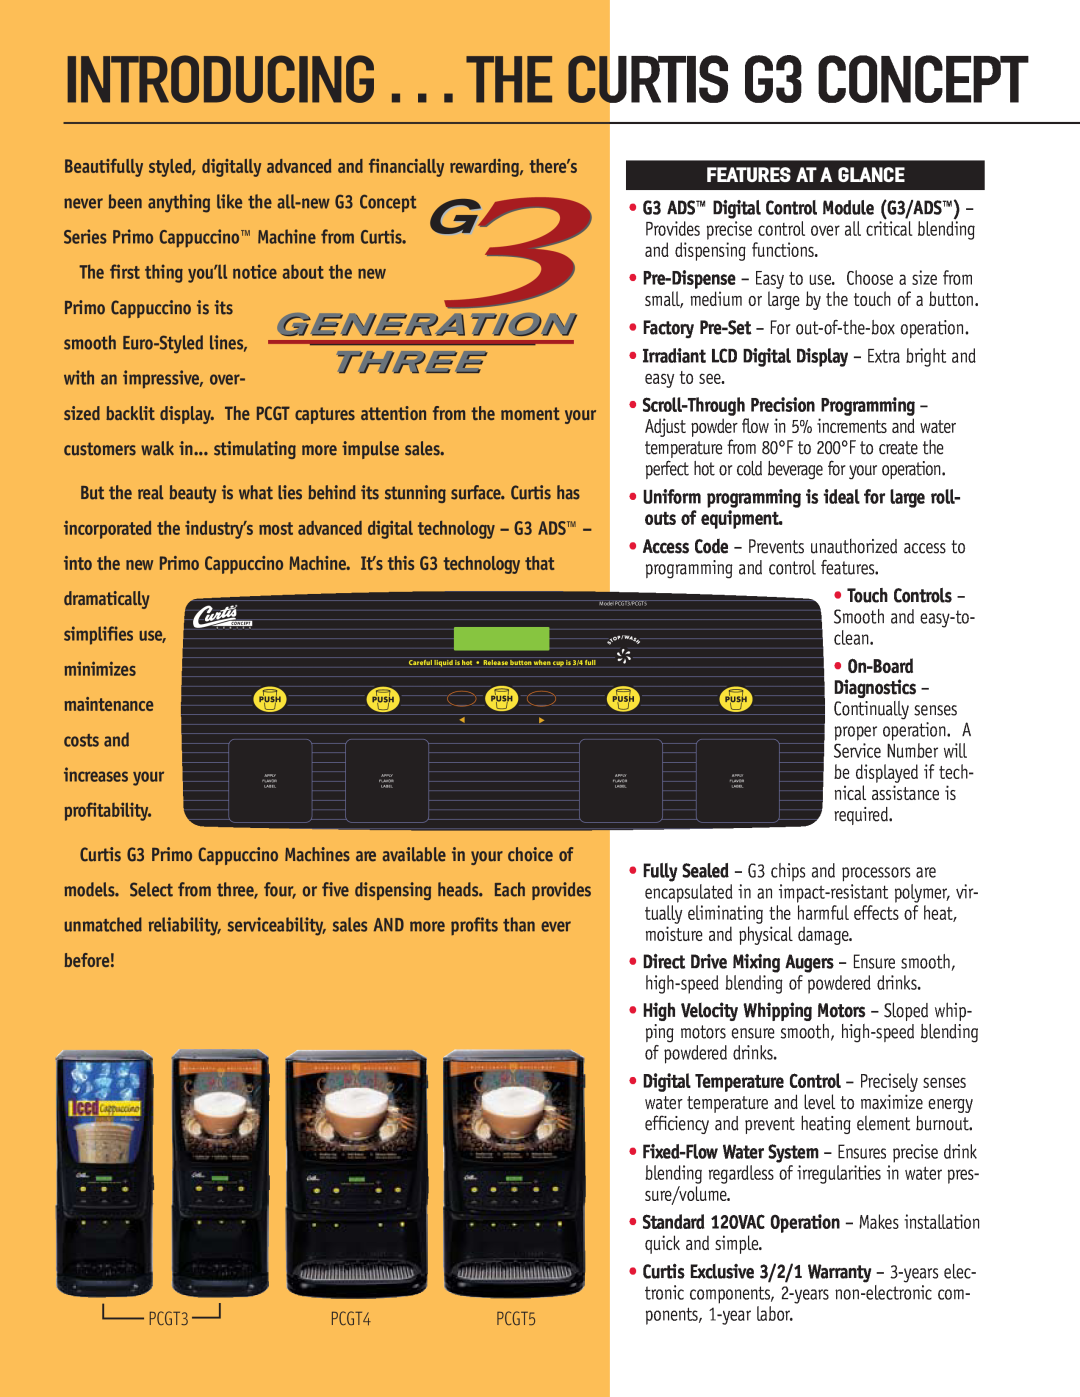 Wibur Curtis Company PCGT3, PCGT5, PCGT4 manual INTRODUCING . . . THE CURTIS G3 CONCEPT, Features At A Glance 